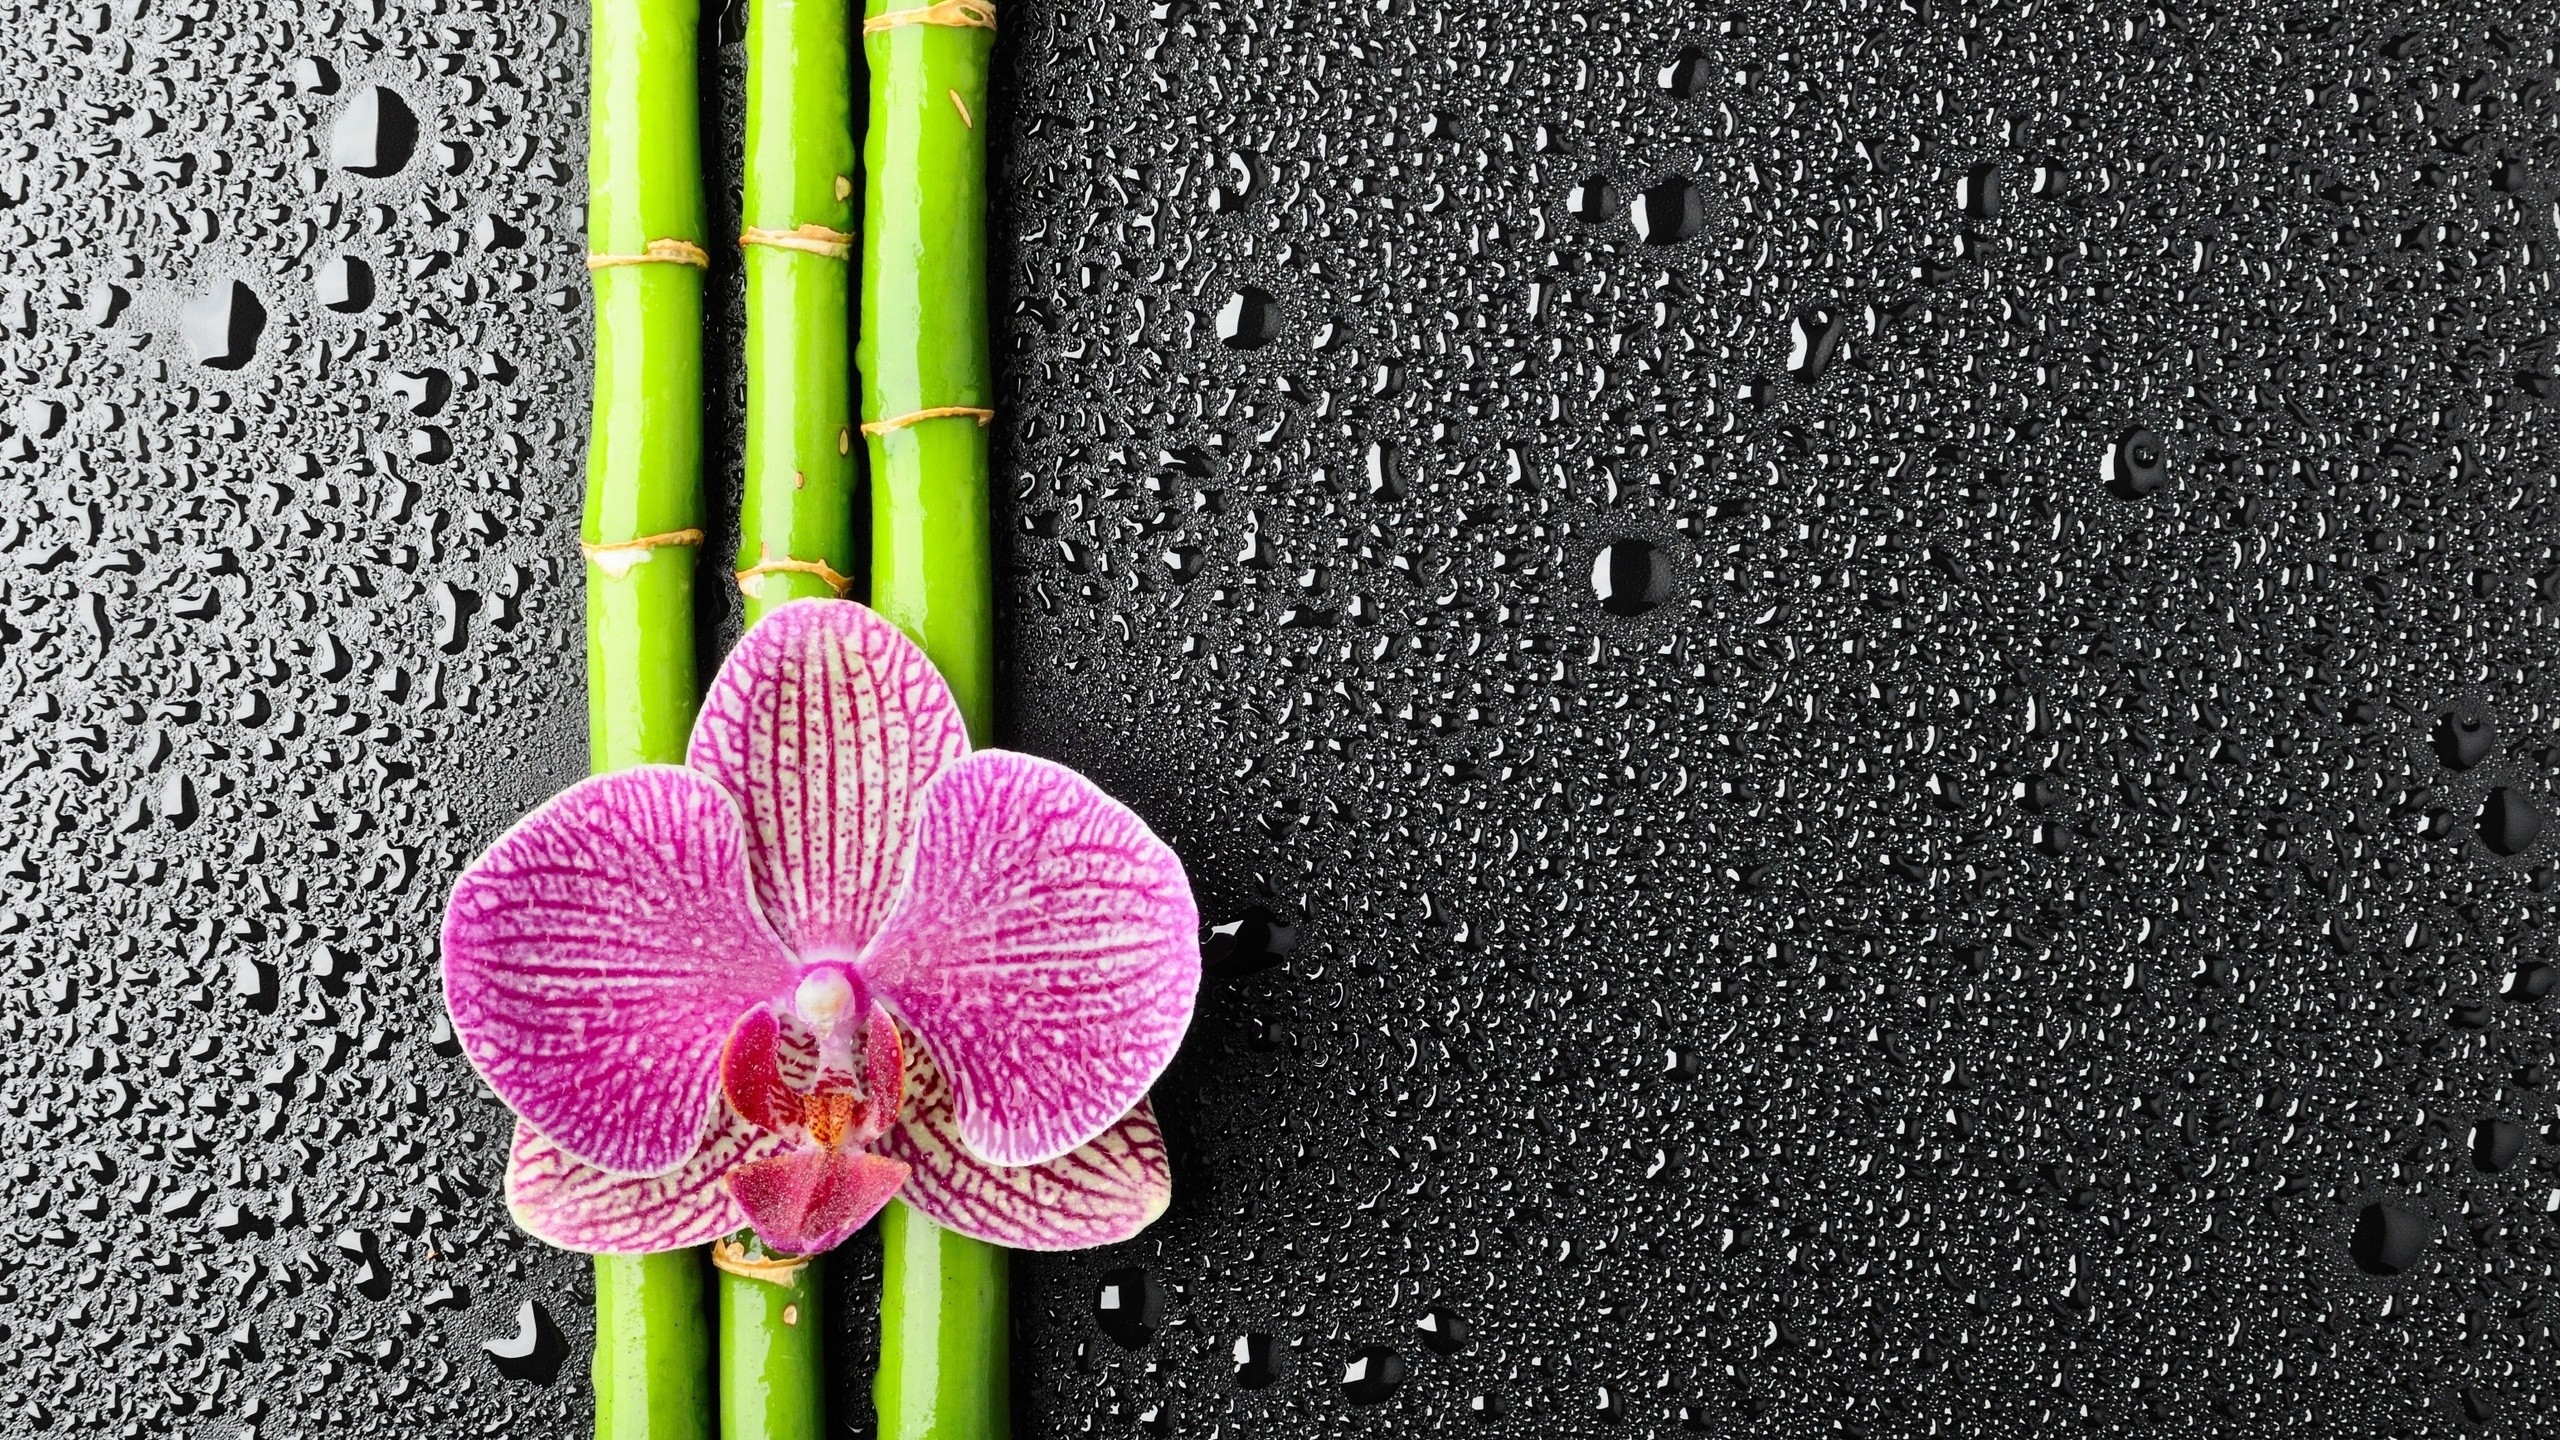 Flowers Water Drops Bamboo Orchids Plants Texture 2560x1440